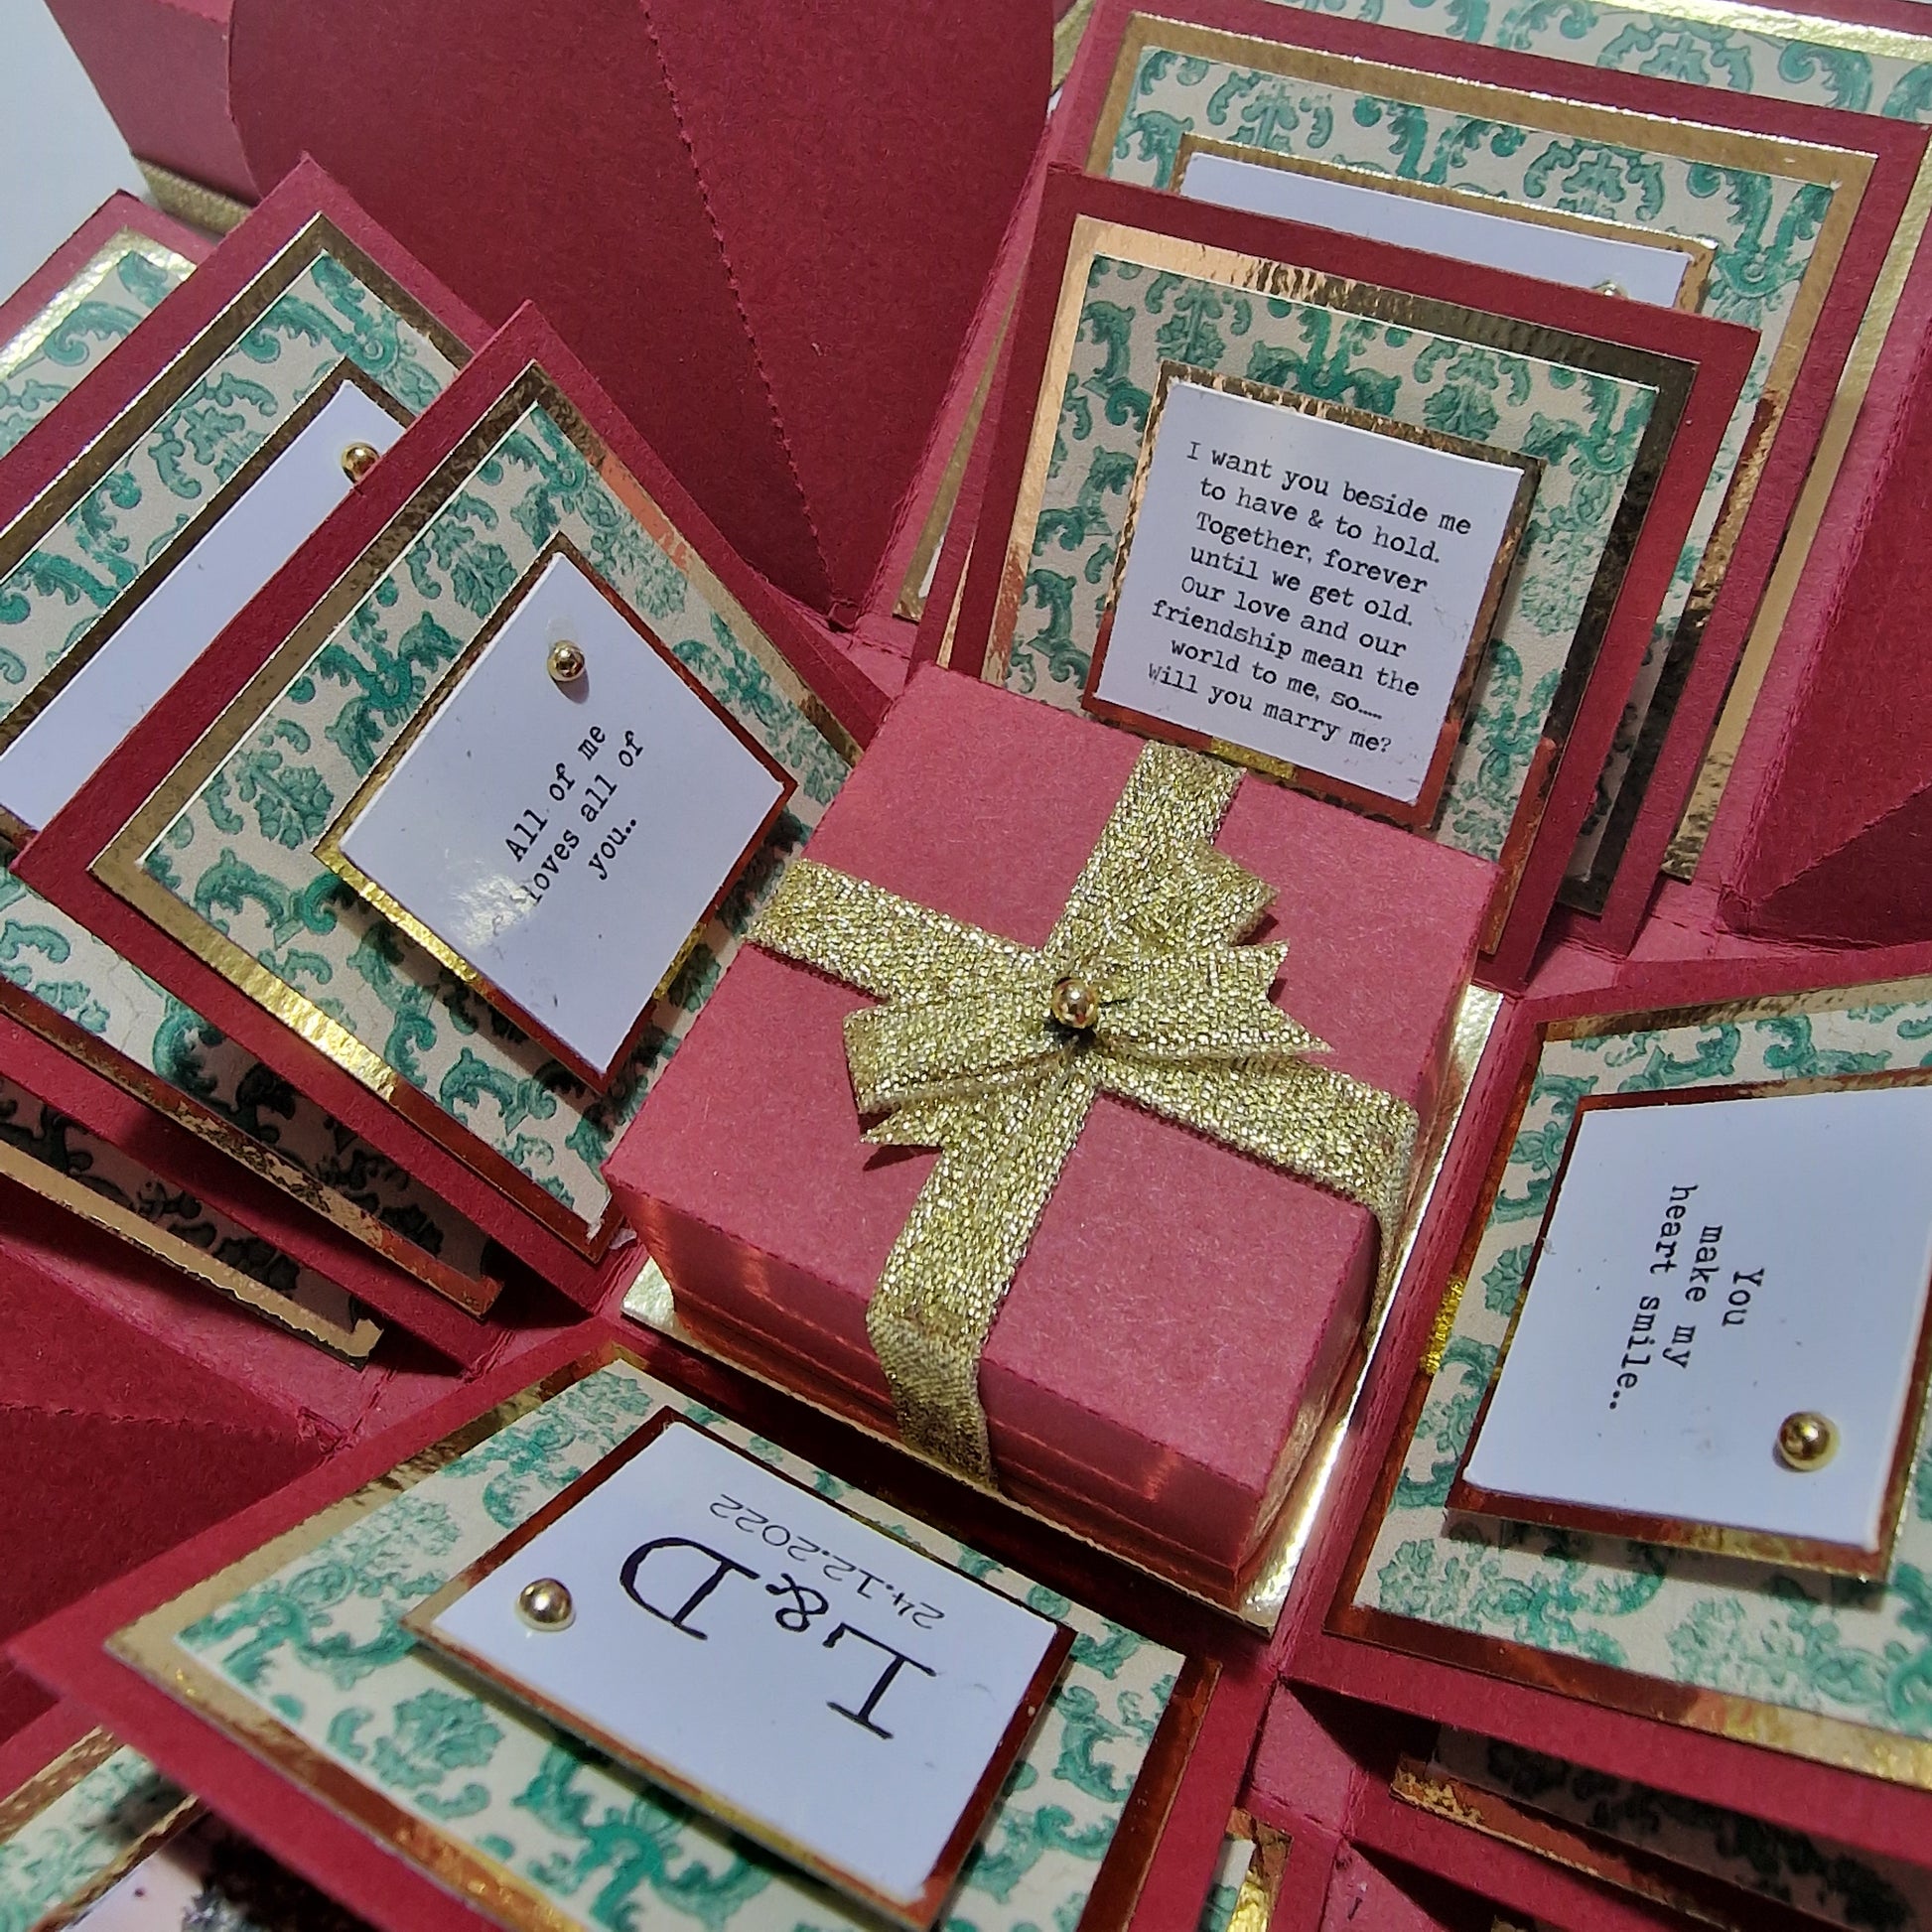 Vintage Christmas Proposal Ring Box with proposal poem